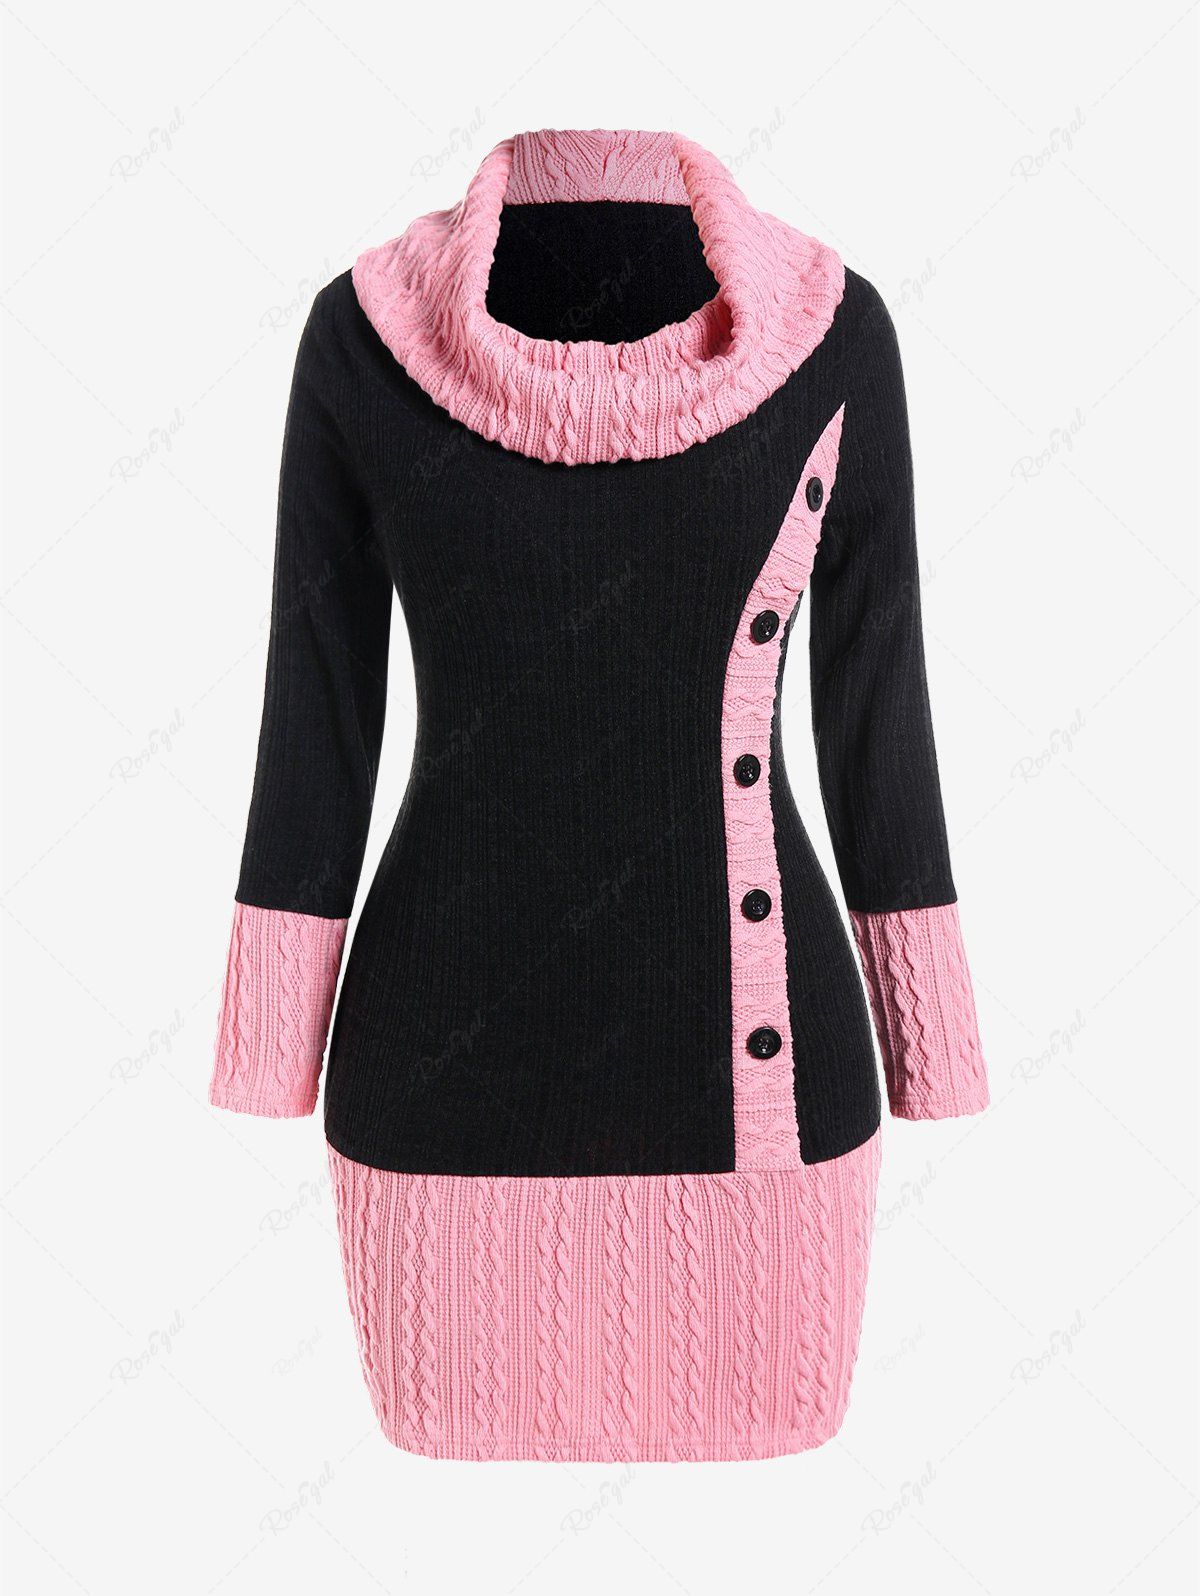 Sale Plus Size Cowl Neck Cable Knit Two Tone Bodycon Mini Dress with Buttons  